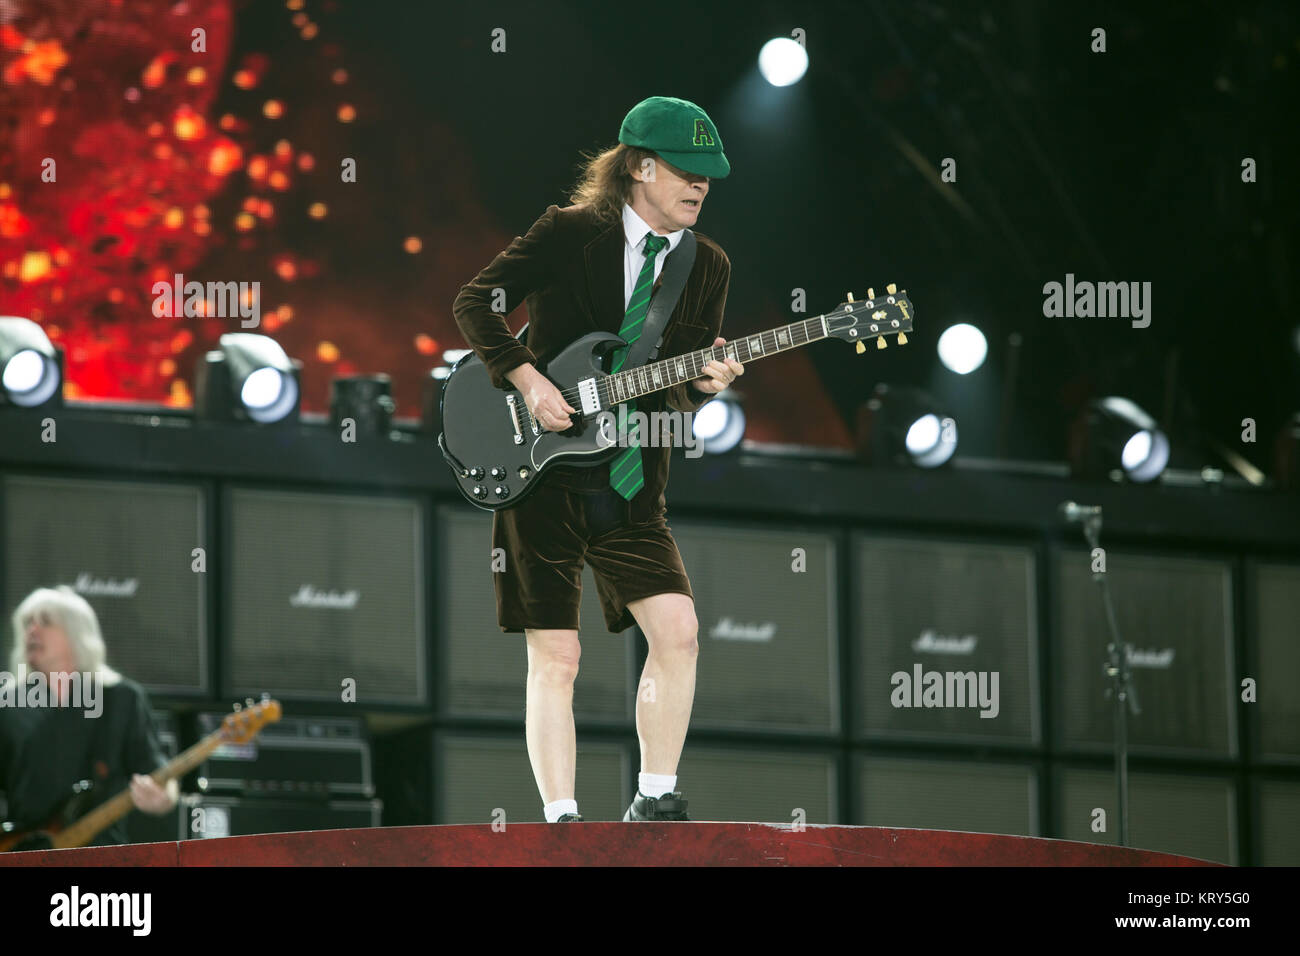 The Australian rock band AC/DC performs a live concert at Valle Hovin Stadion in Oslo as part of the Rock or Bust World 2015 Tour. Here guitarist Angus Young seen live on stage. Norway, 17/07 2015. Stock Photo